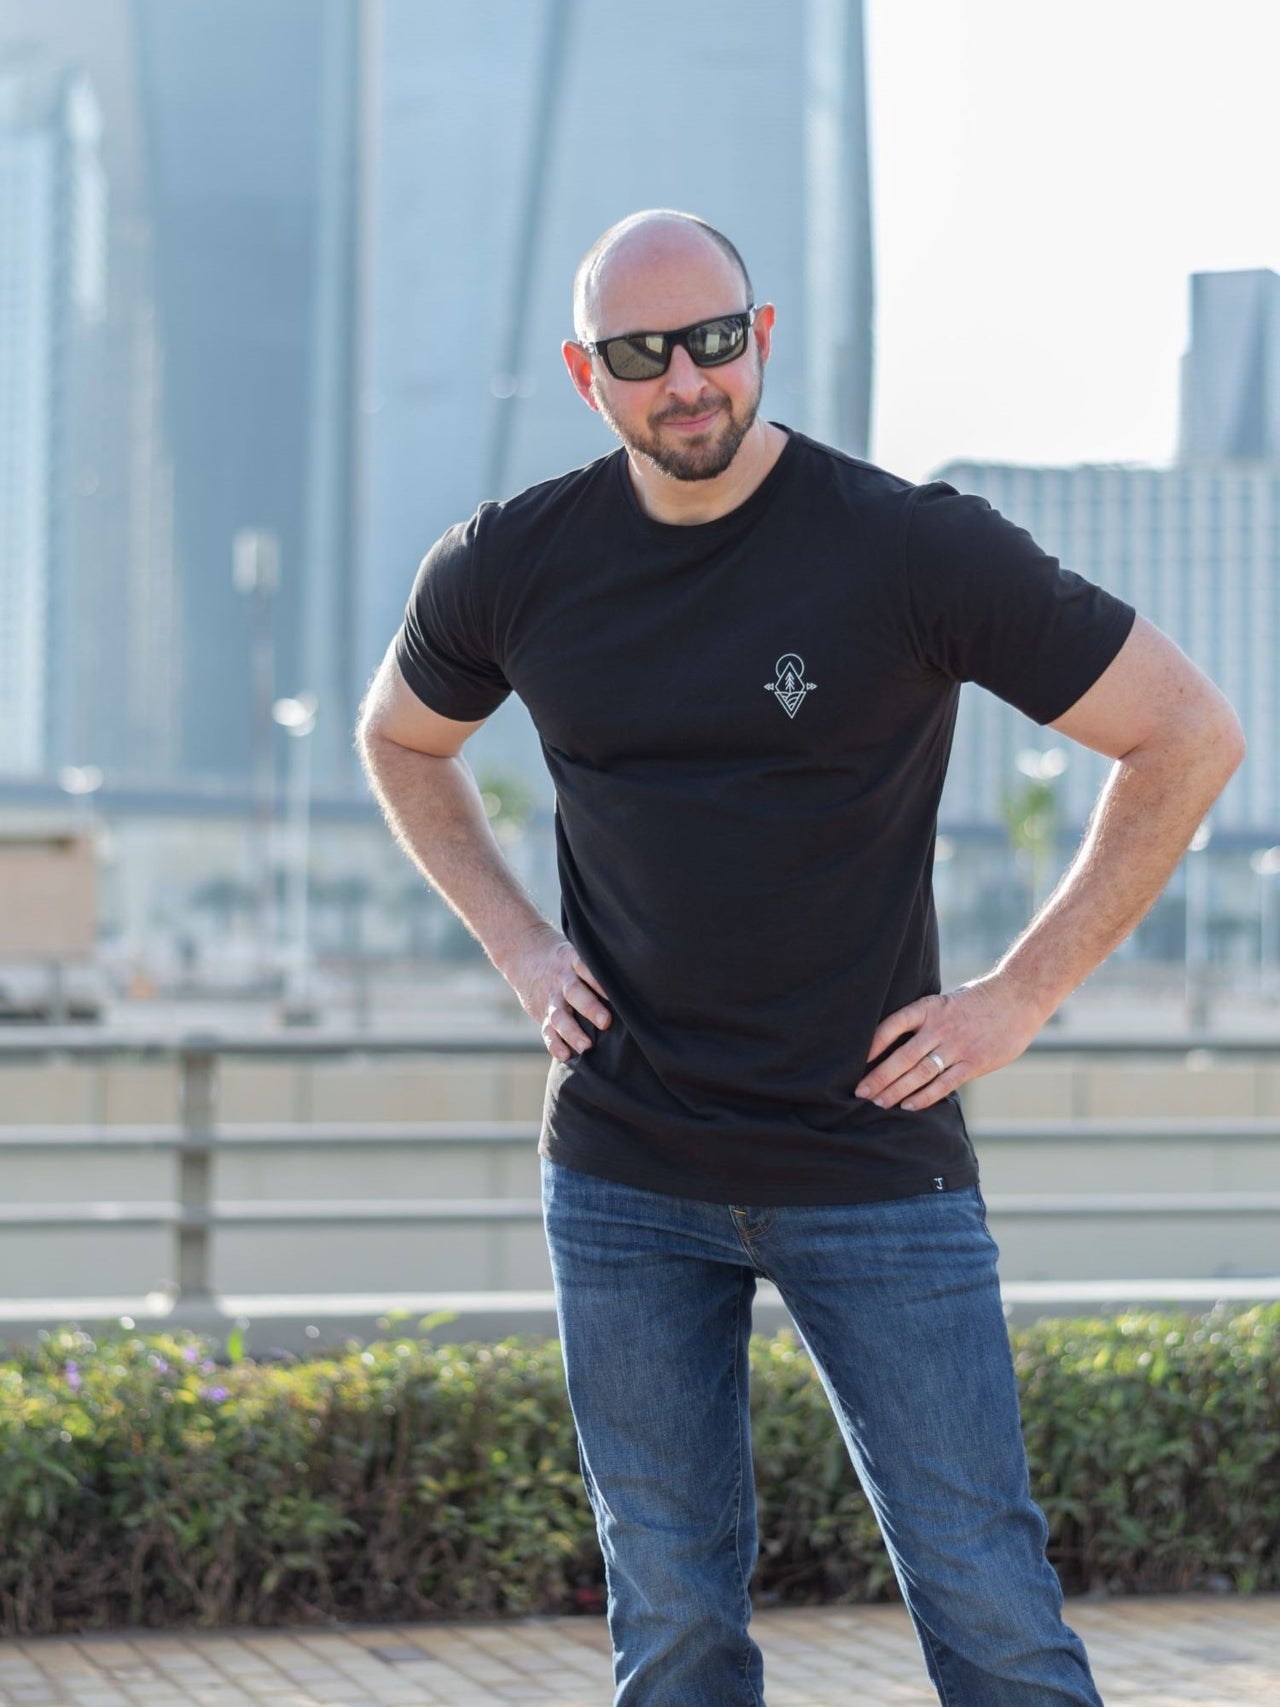 A tall and slim guy in the street with his hands on his hips and wearing a black minimal graphic tall t-shirt.